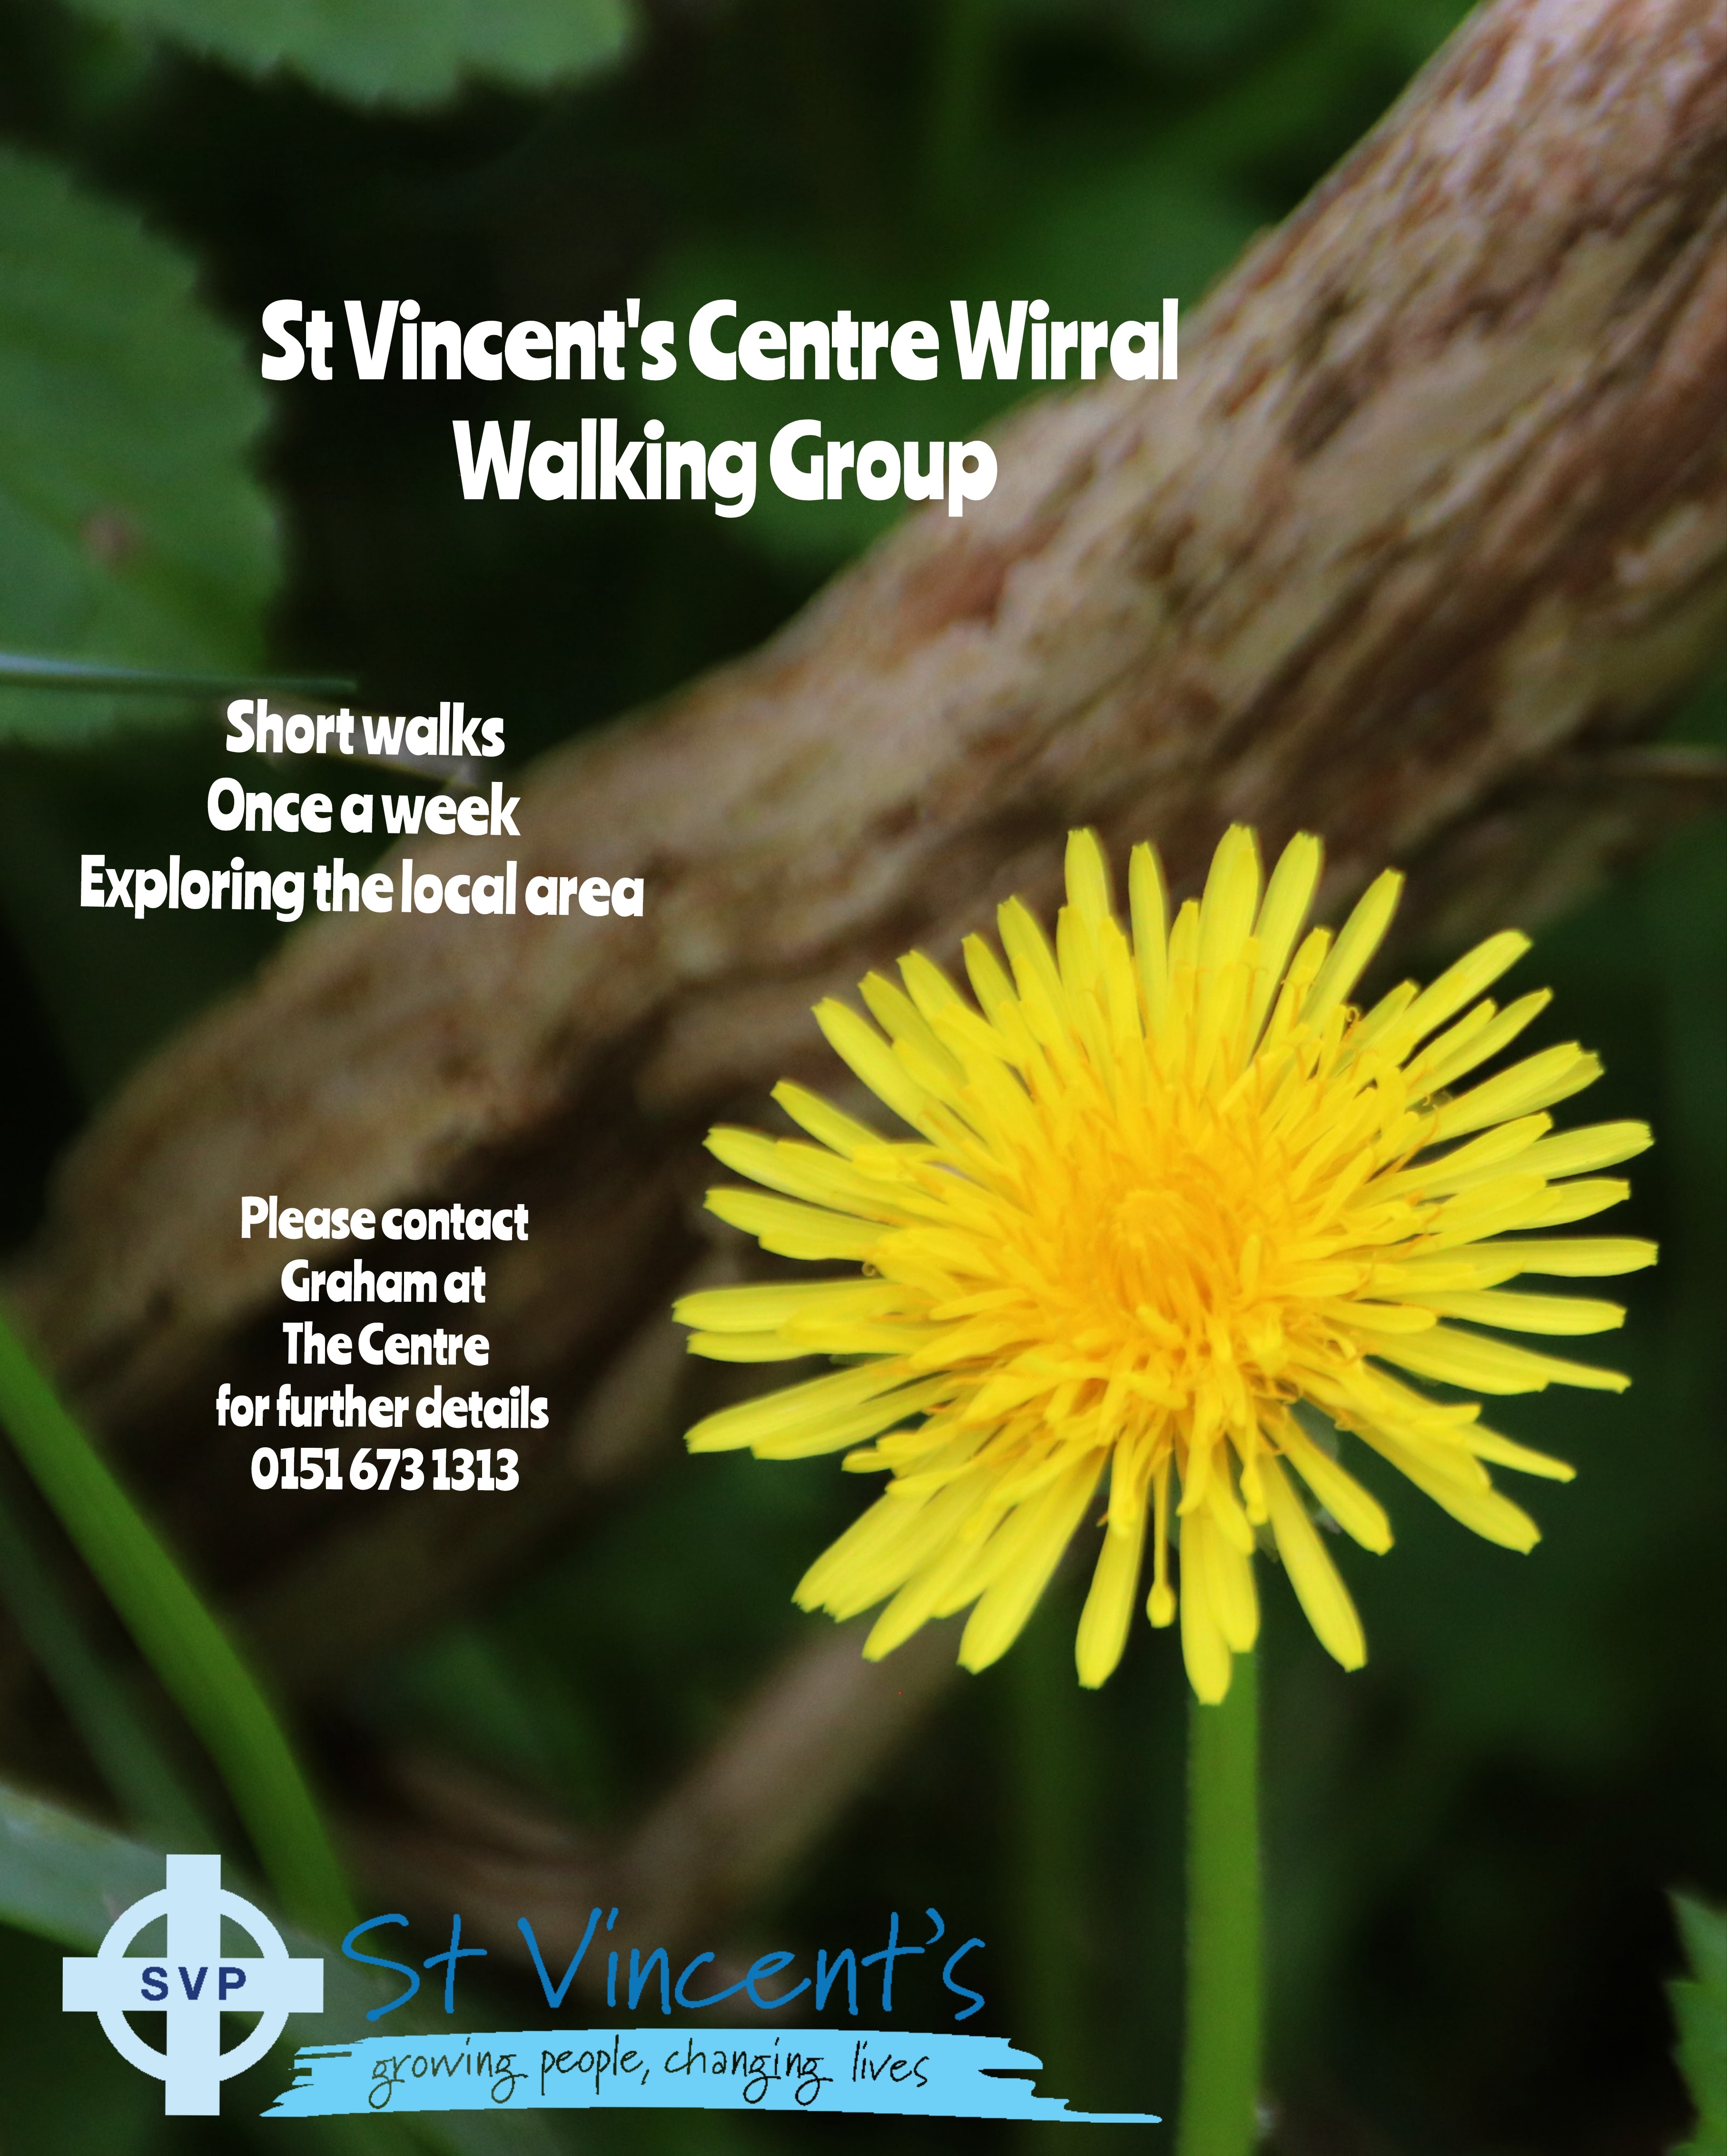 Details of upcoming walks from the centre